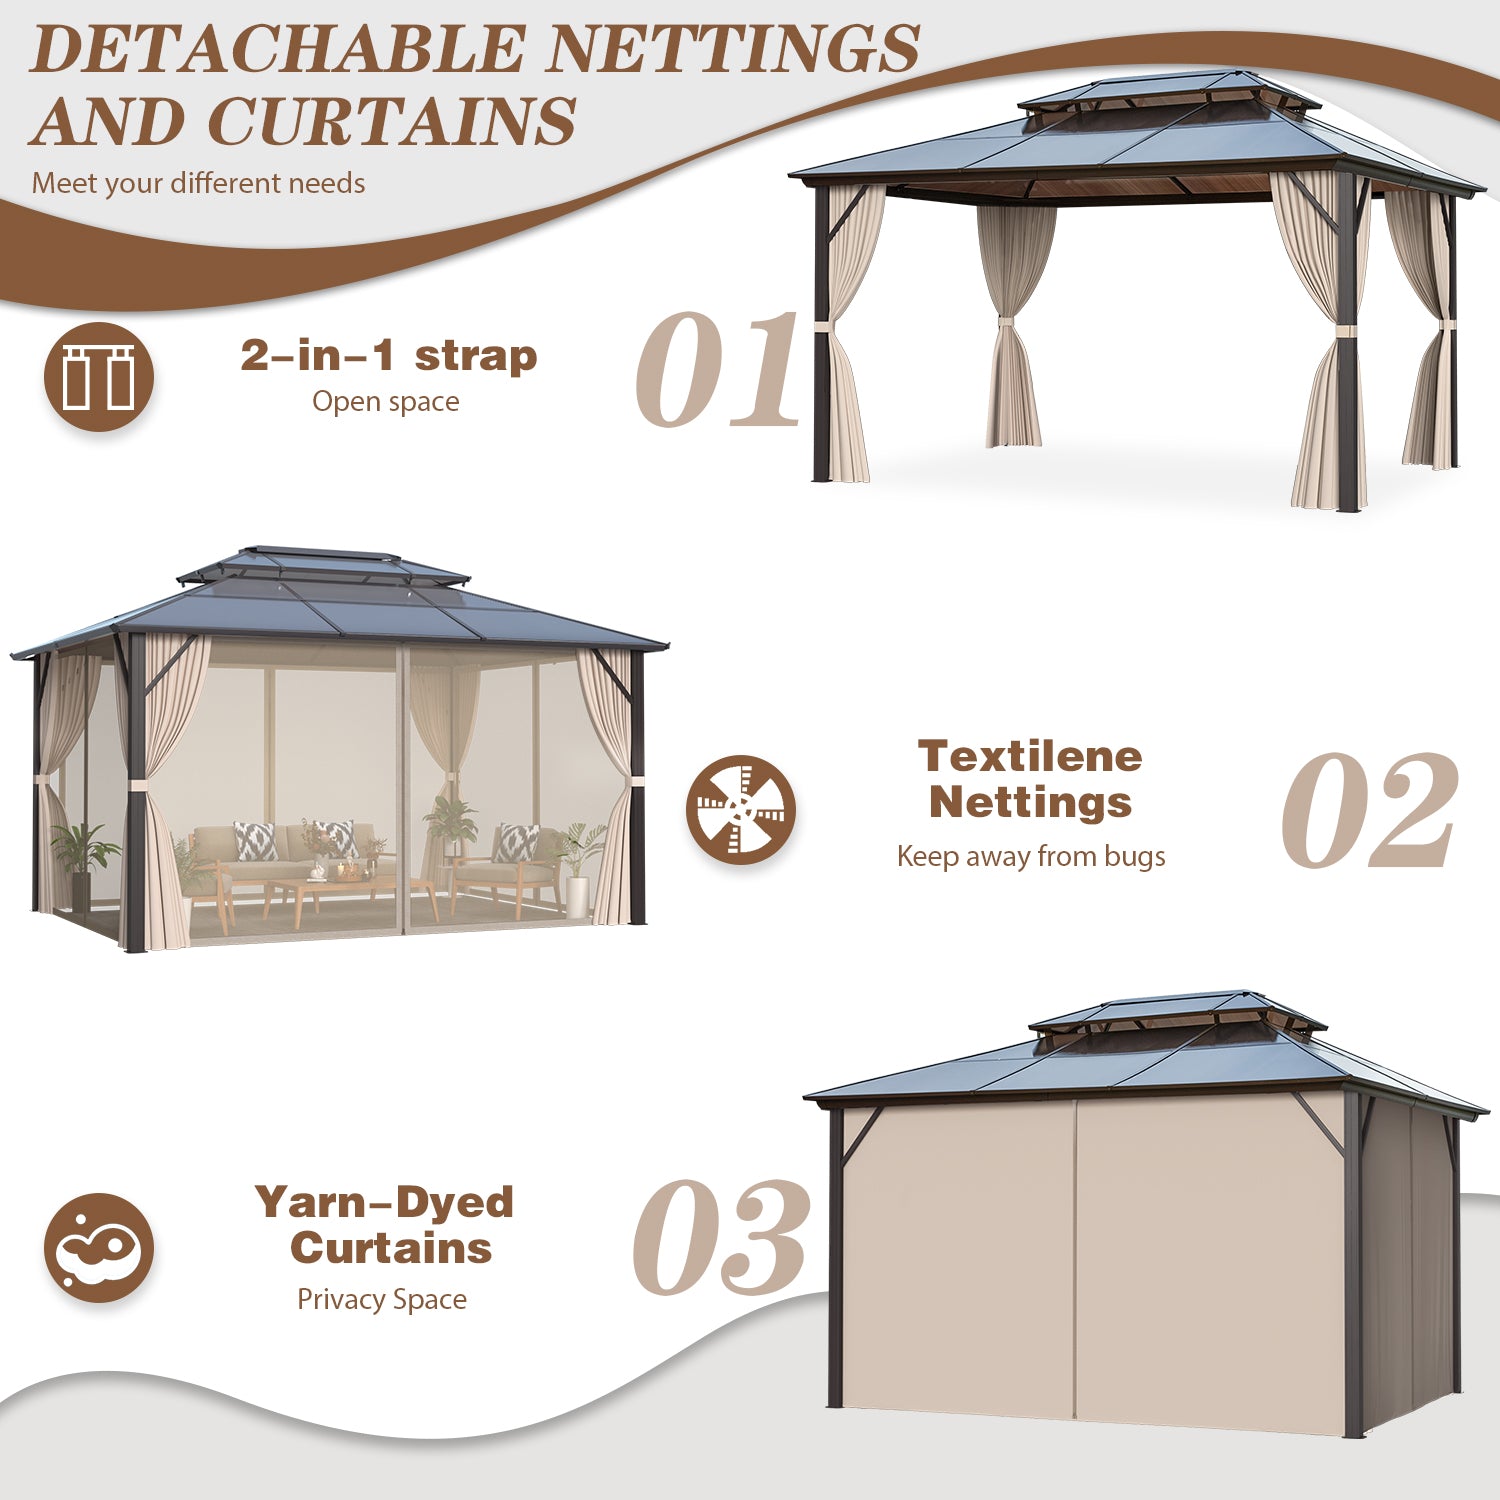 EROMMY 12'x16' Patio Hardtop Gazebos Canopy Polycarbonate Double-Roof w/ Netting & Curtains - Erommy